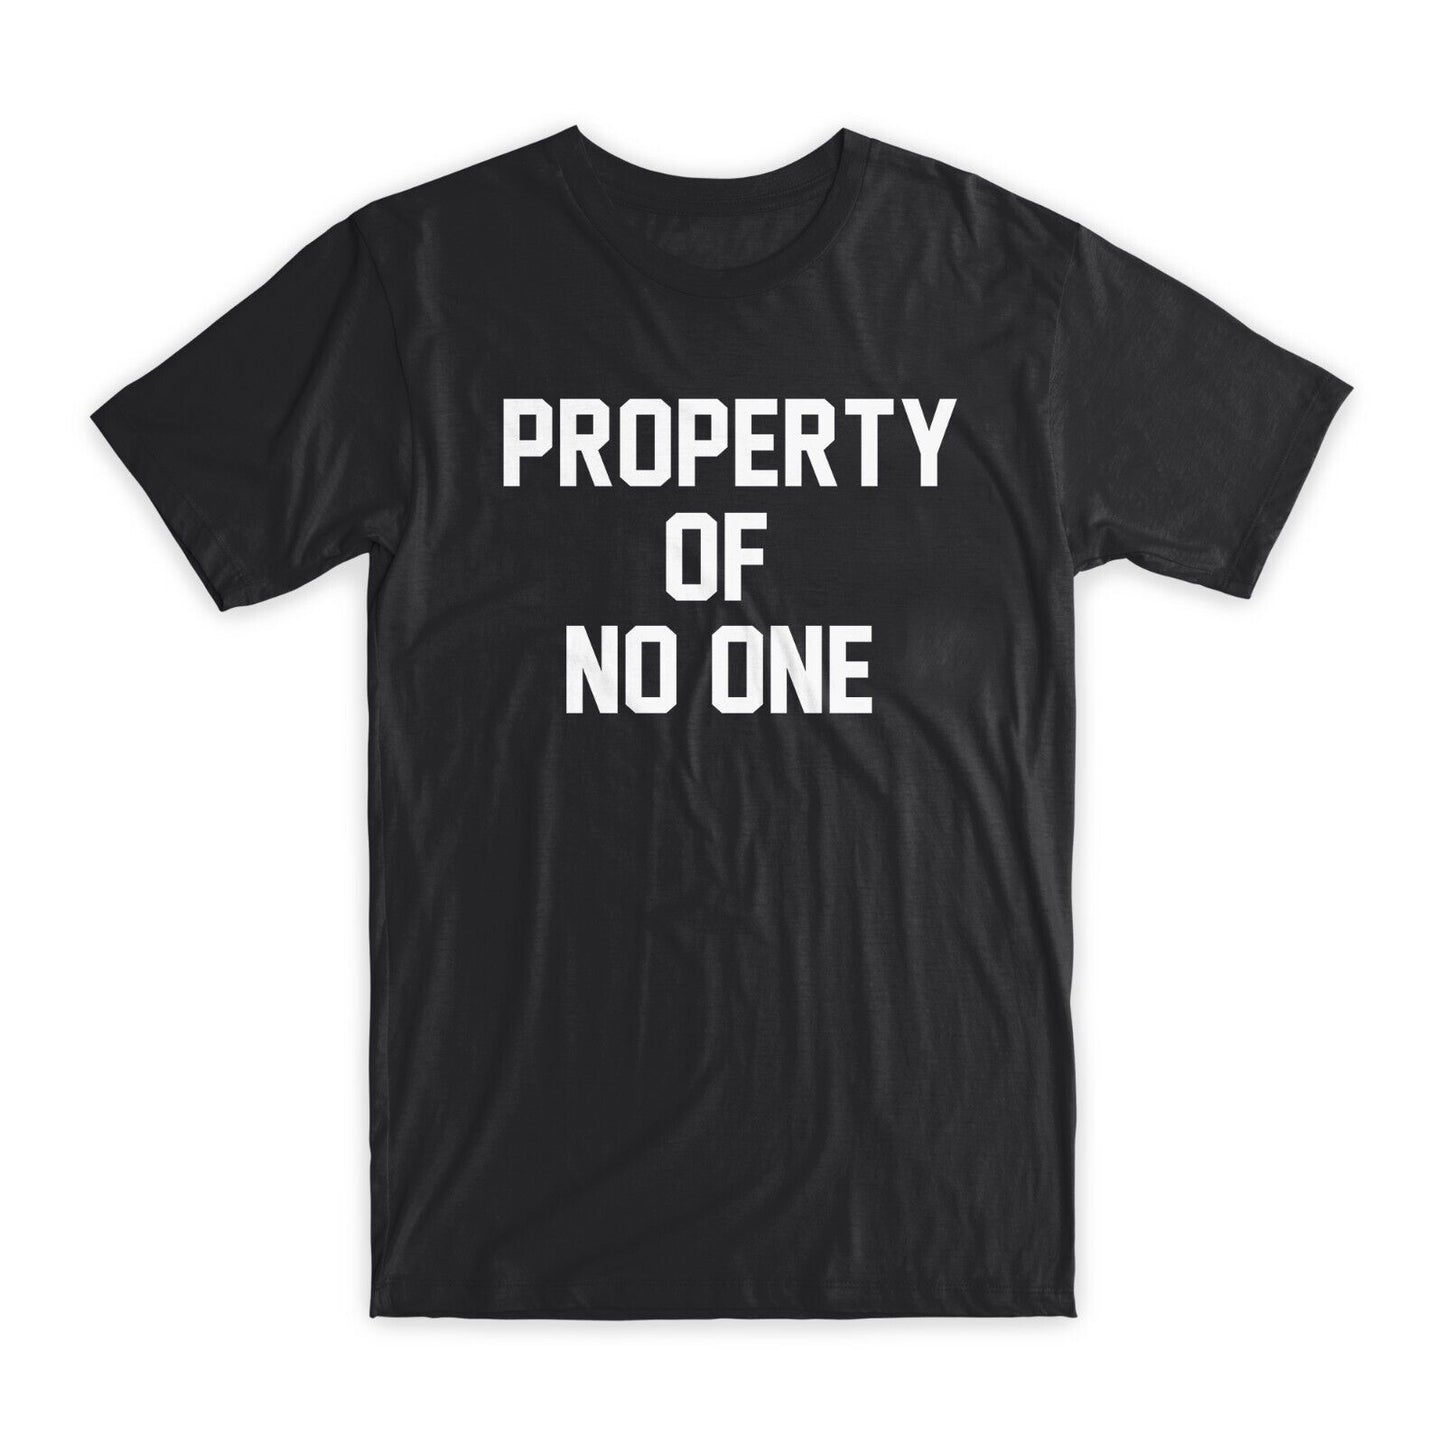 Property of No One T-Shirt Premium Soft Cotton Crew Neck Funny Tees Gifts NEW